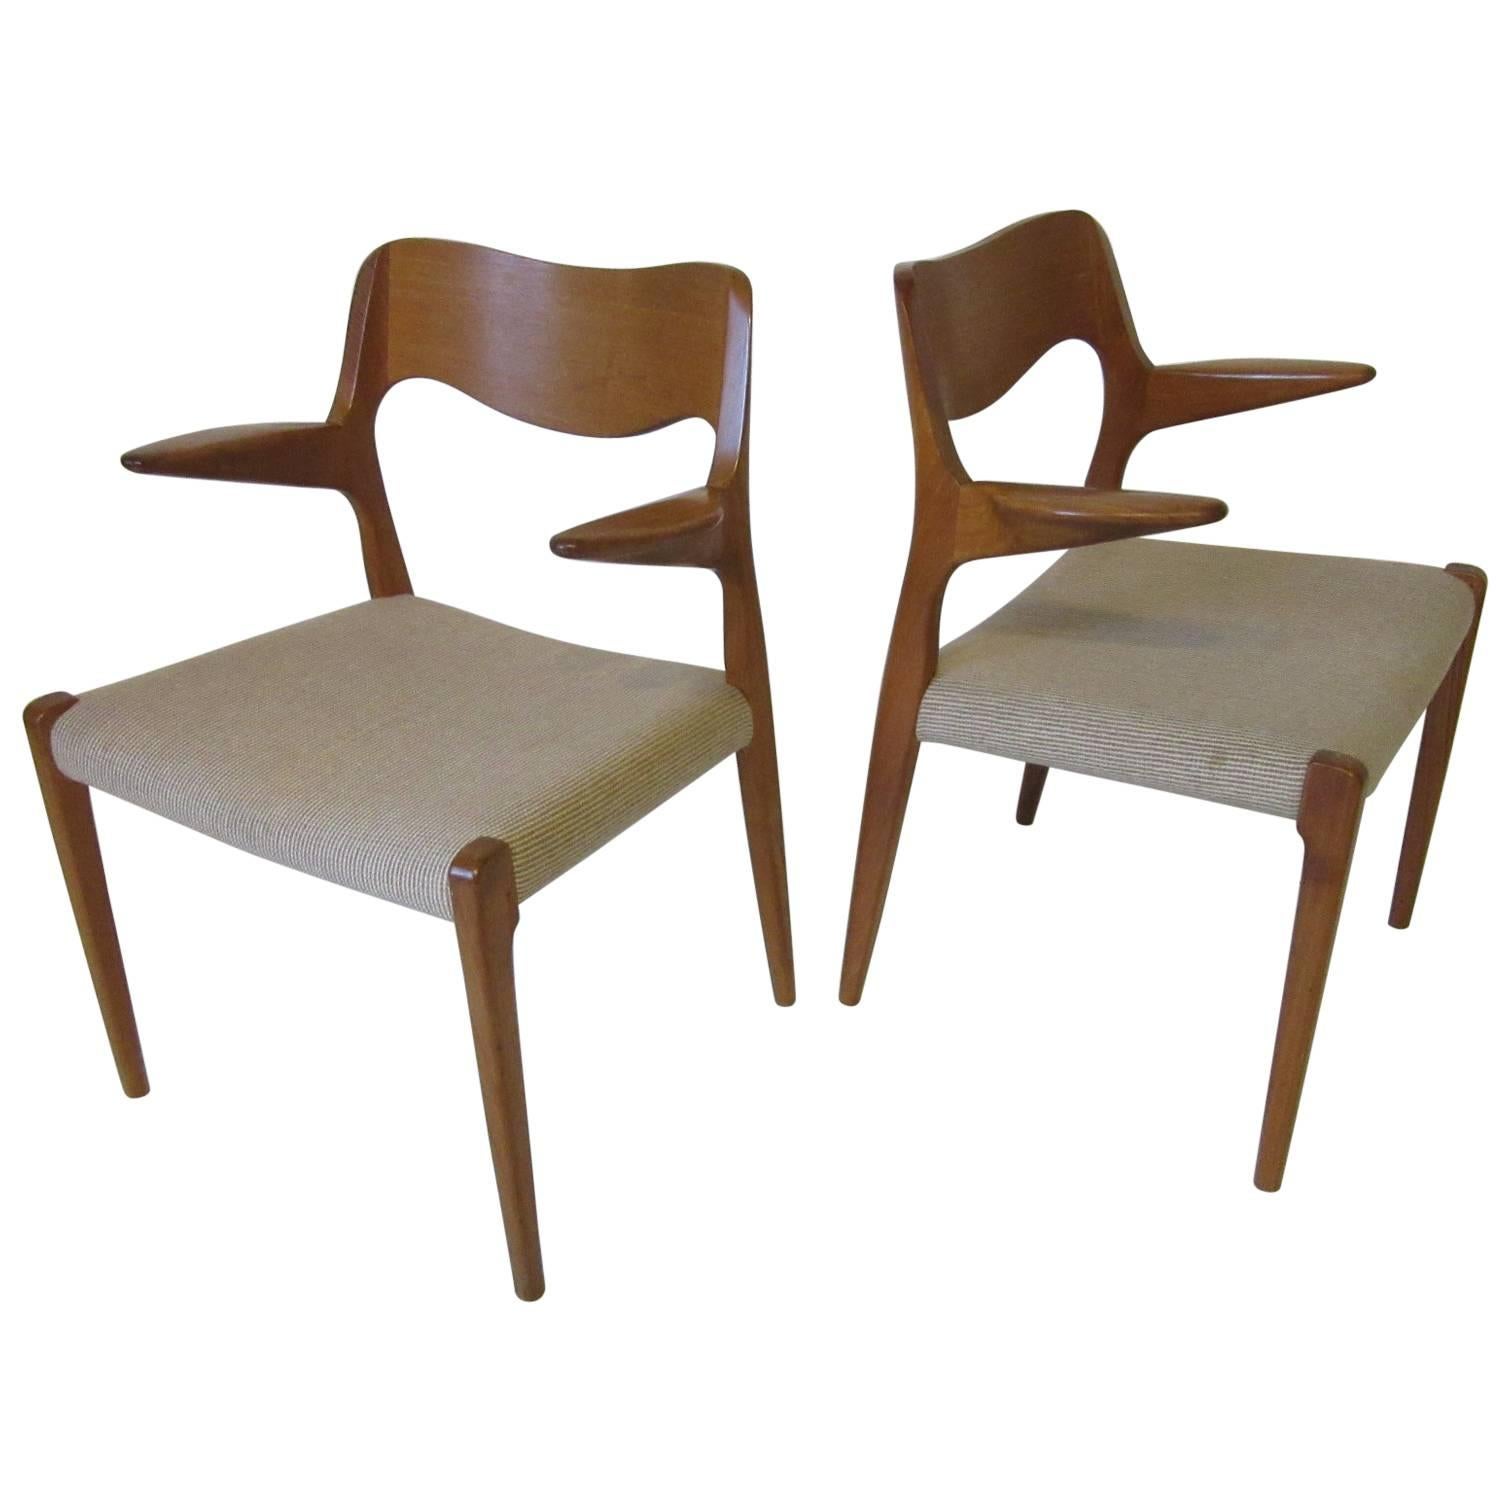 Two Danish Teak Dining Armchairs by Niels Otto Moller for J.L. Moller